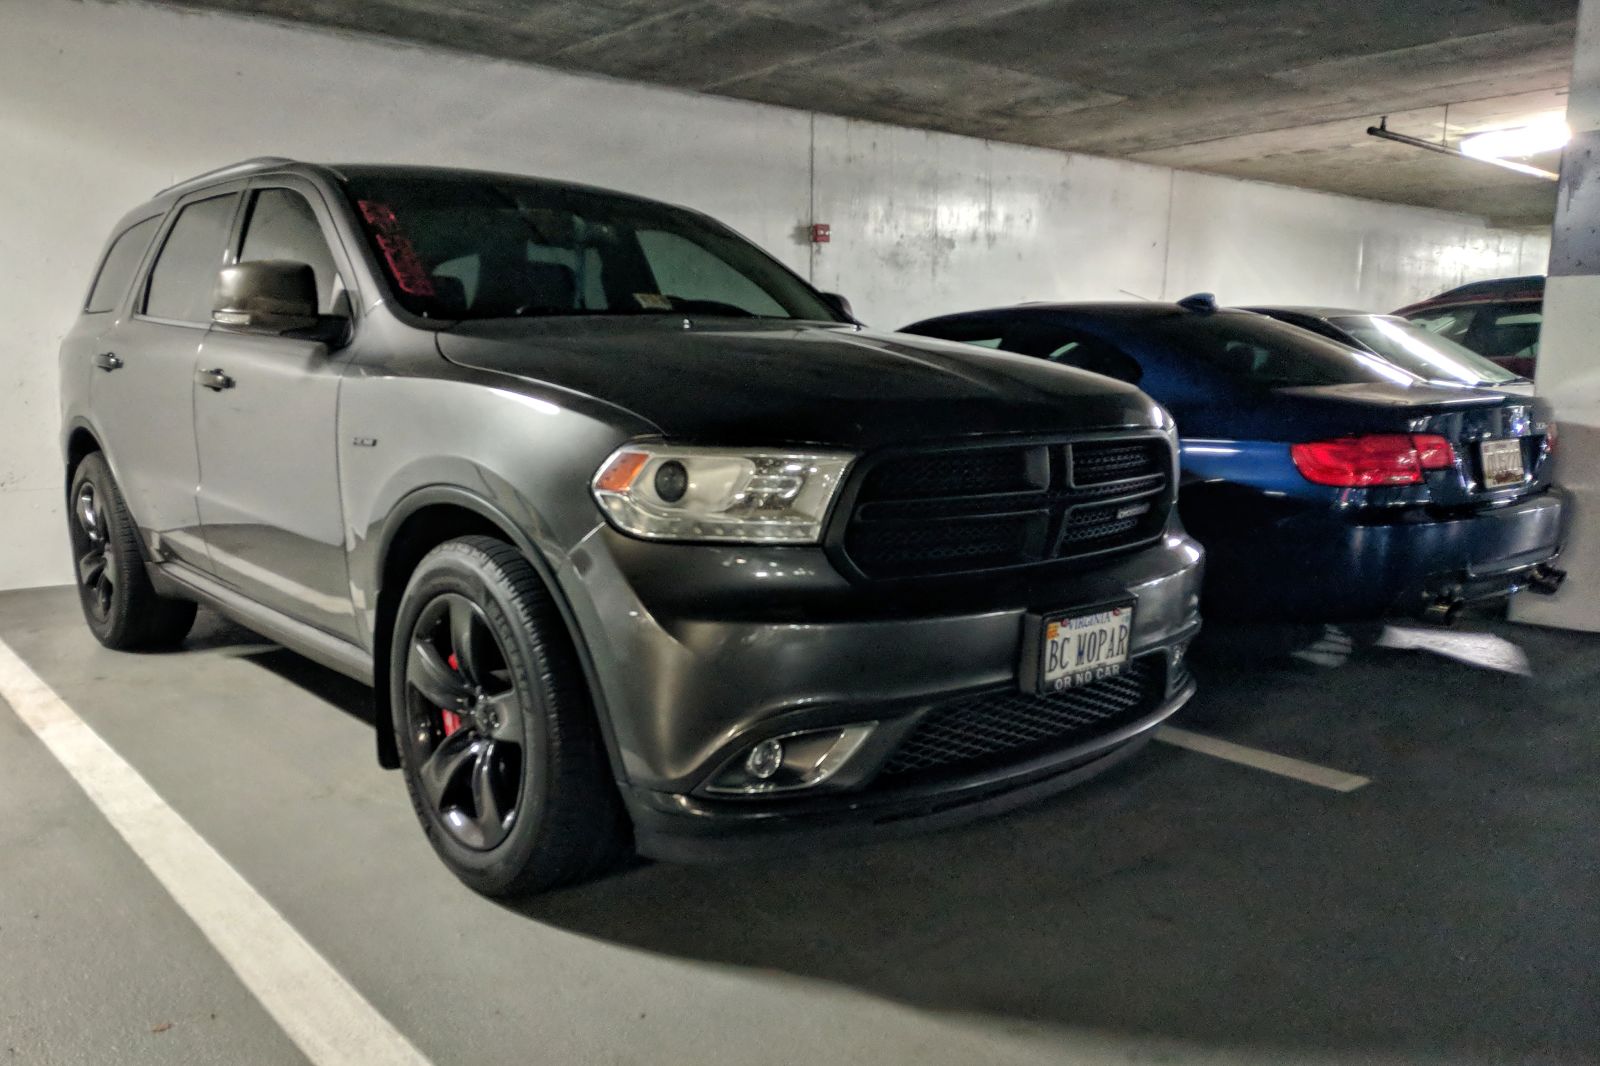 Illustration for article titled There are not one, but two, SRT vehicles with Mopar-themed vanity plates in my office parking garage